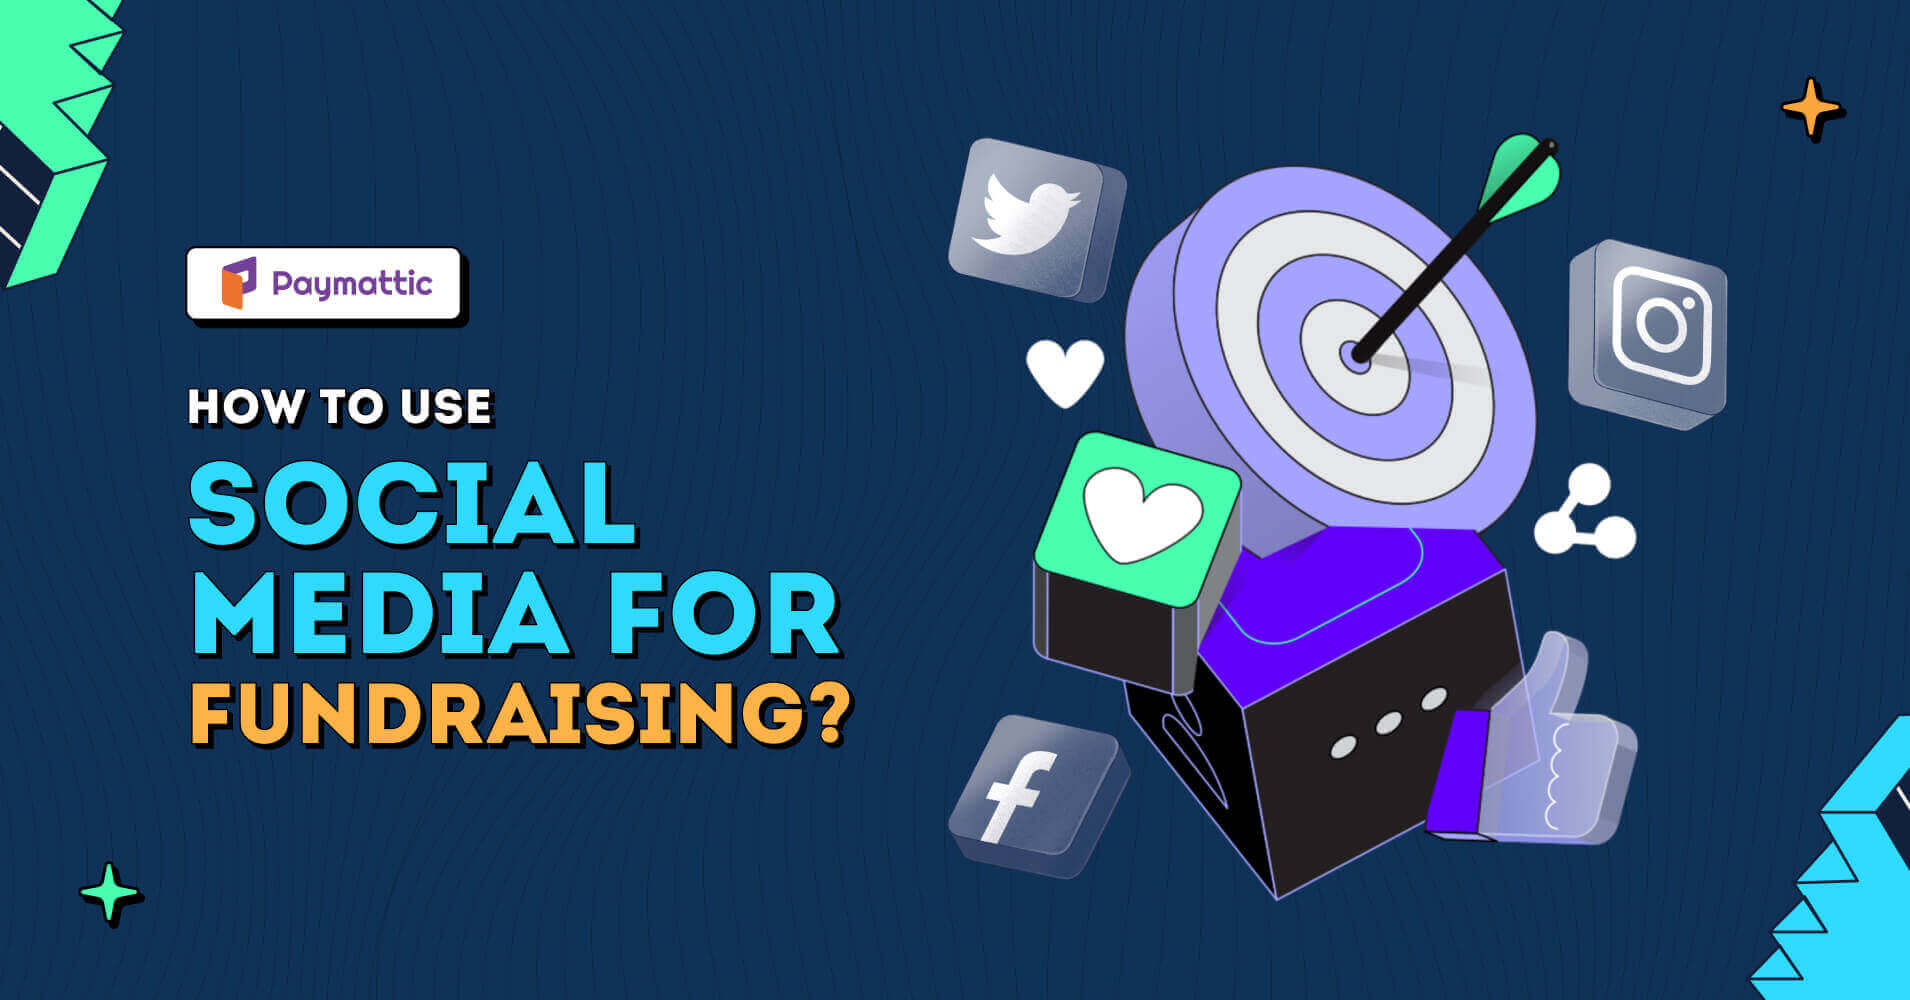 How to Use Social Media for Fundraising?